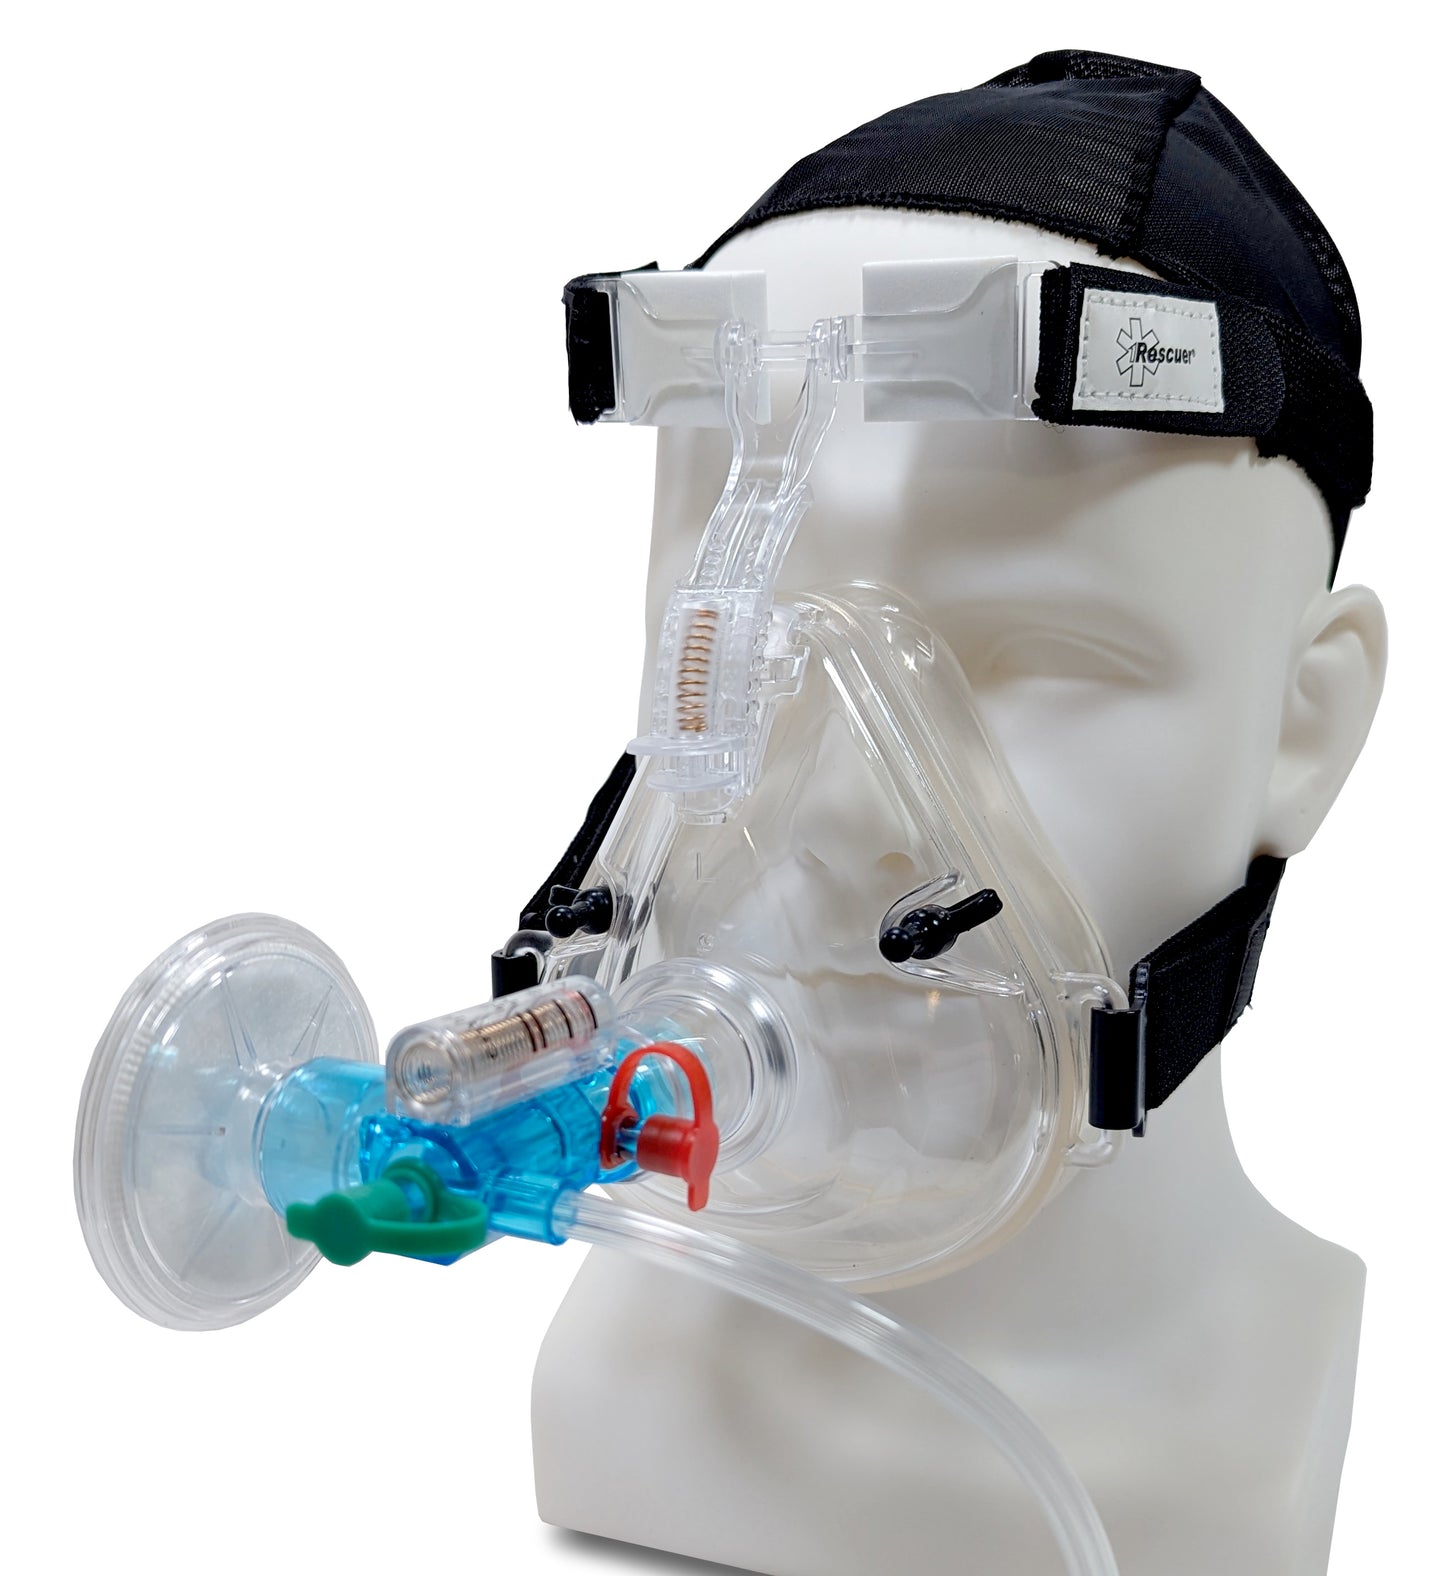 Rescuer® II 8800 - Compact CPAP system with adjustable large CPAP mask